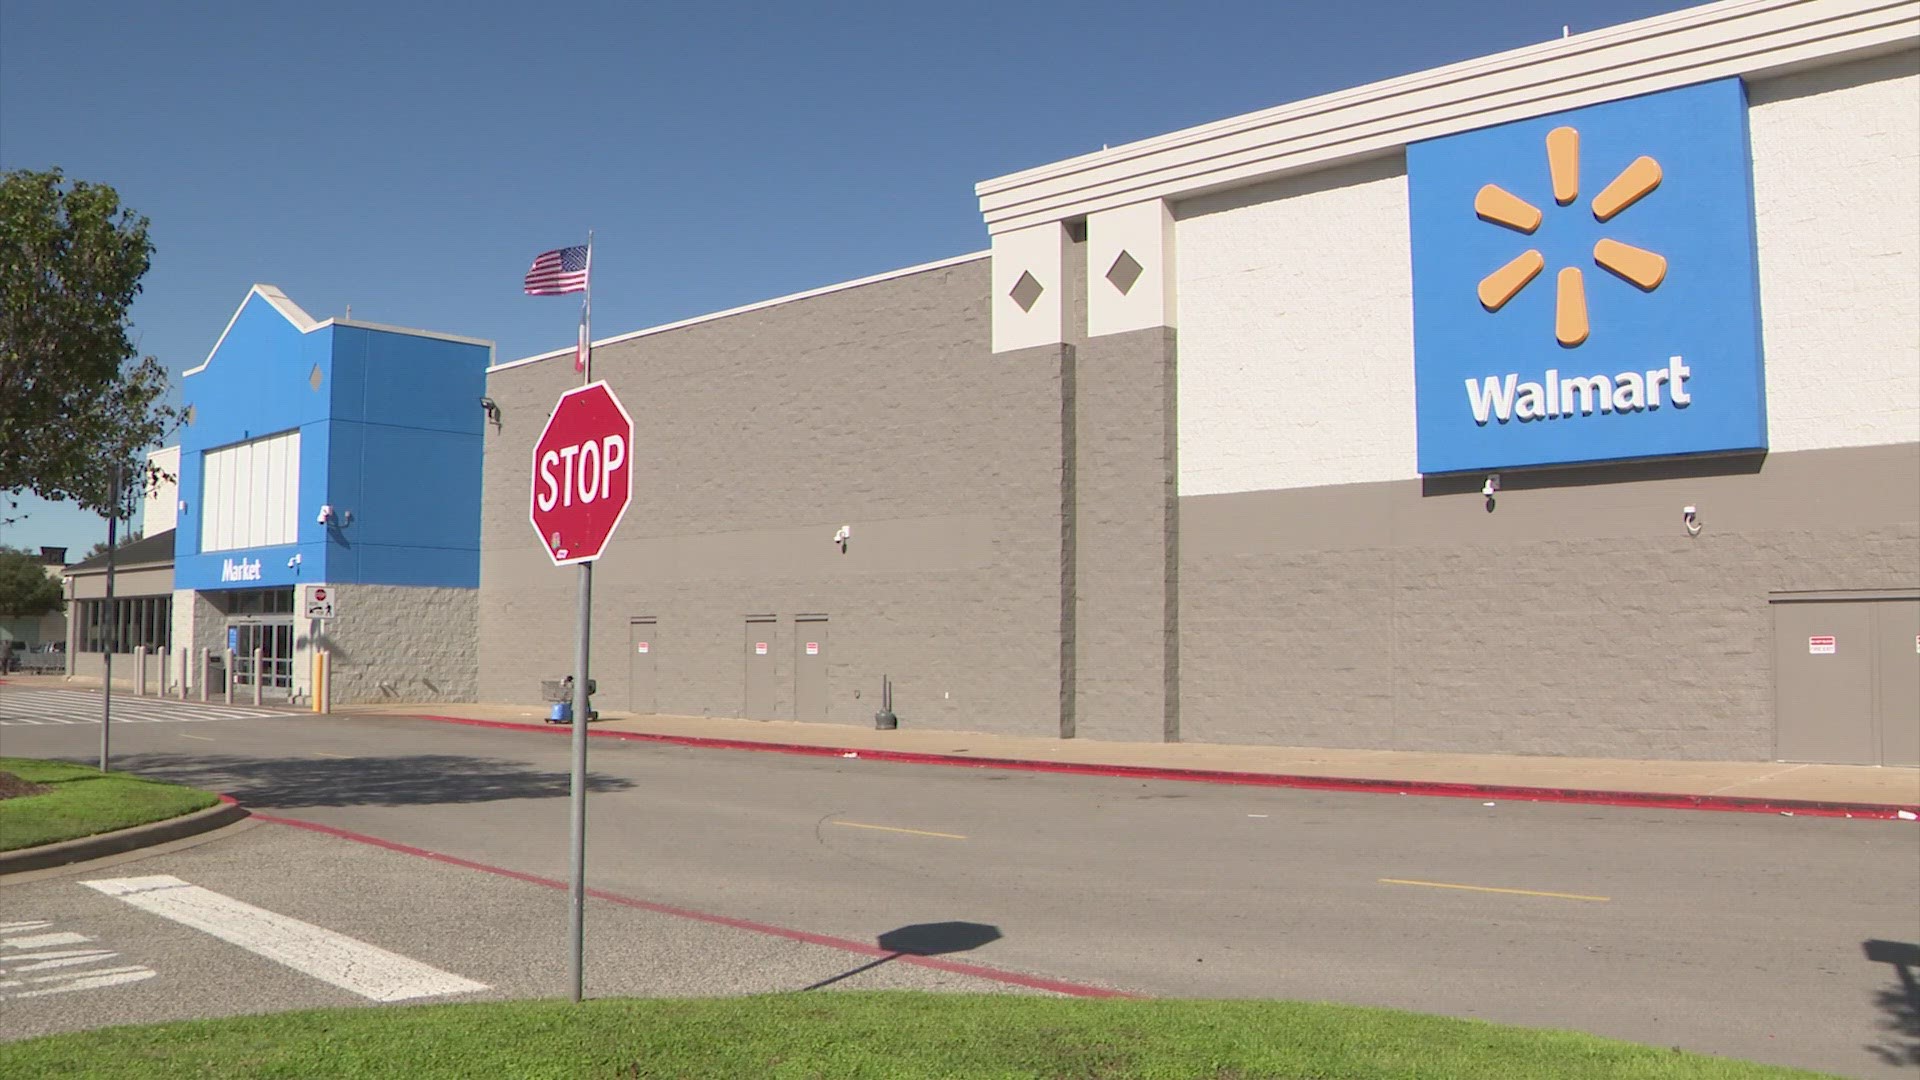 Humans and robots are working together to fill your online orders at a Walmart fulfillment center in Katy.